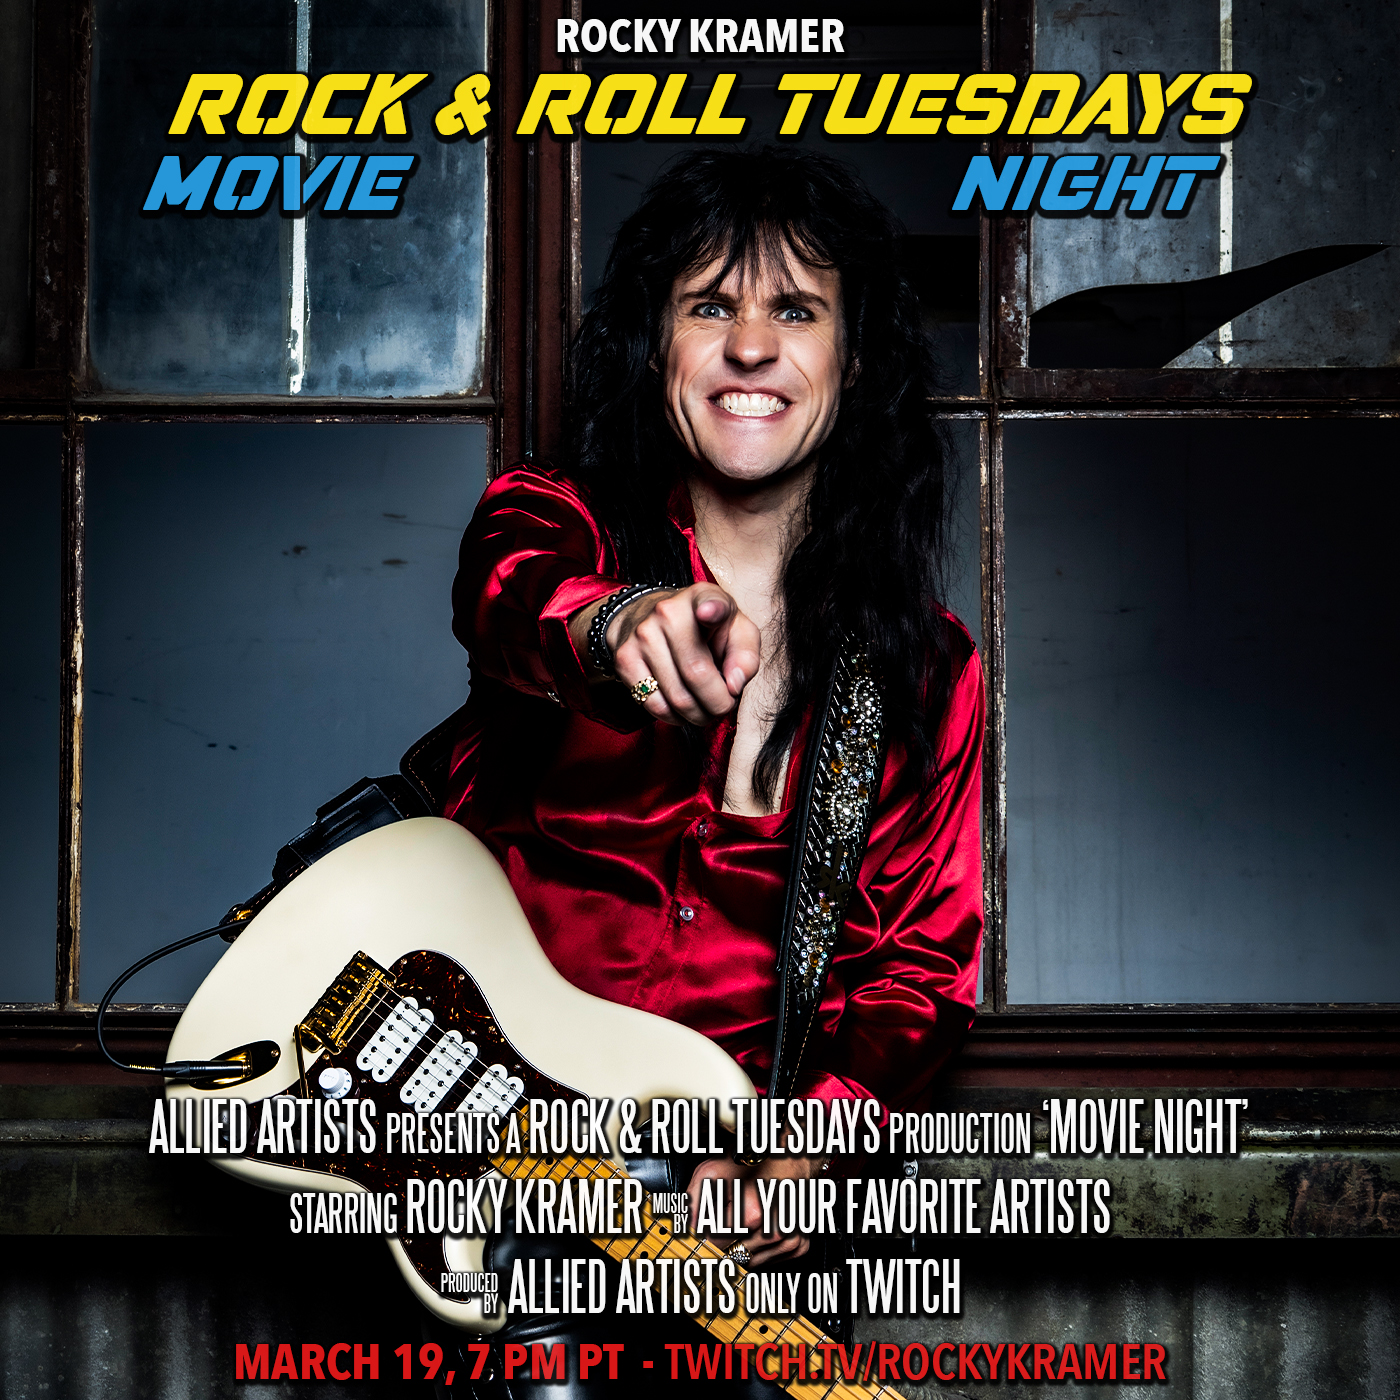 Rocky Kramer’s Rock & Roll Tuesdays Presents “Movie Night” On Tuesday 3/19/24, 7 PM PT on Twitch